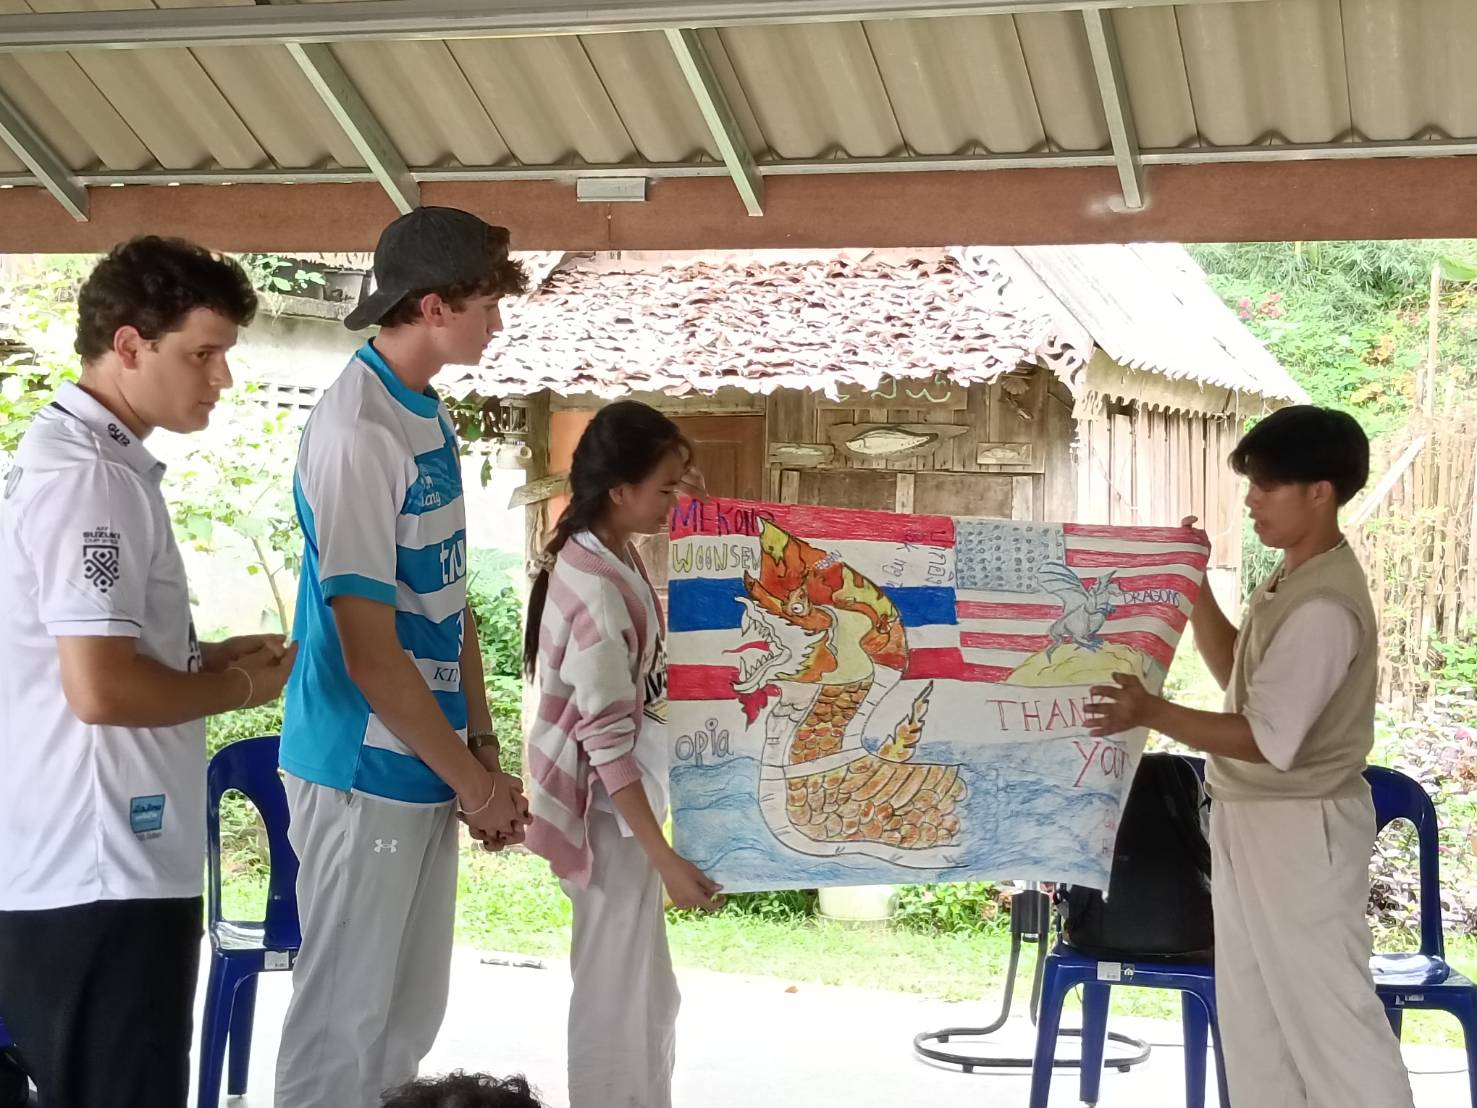 ‘Where There Be Dragons’ – Youth Group from America and Europe Exchange with Mekong Youth Group at Mekong School and a field trip to Ban Pak Ing Tai village, Northern Thailand.